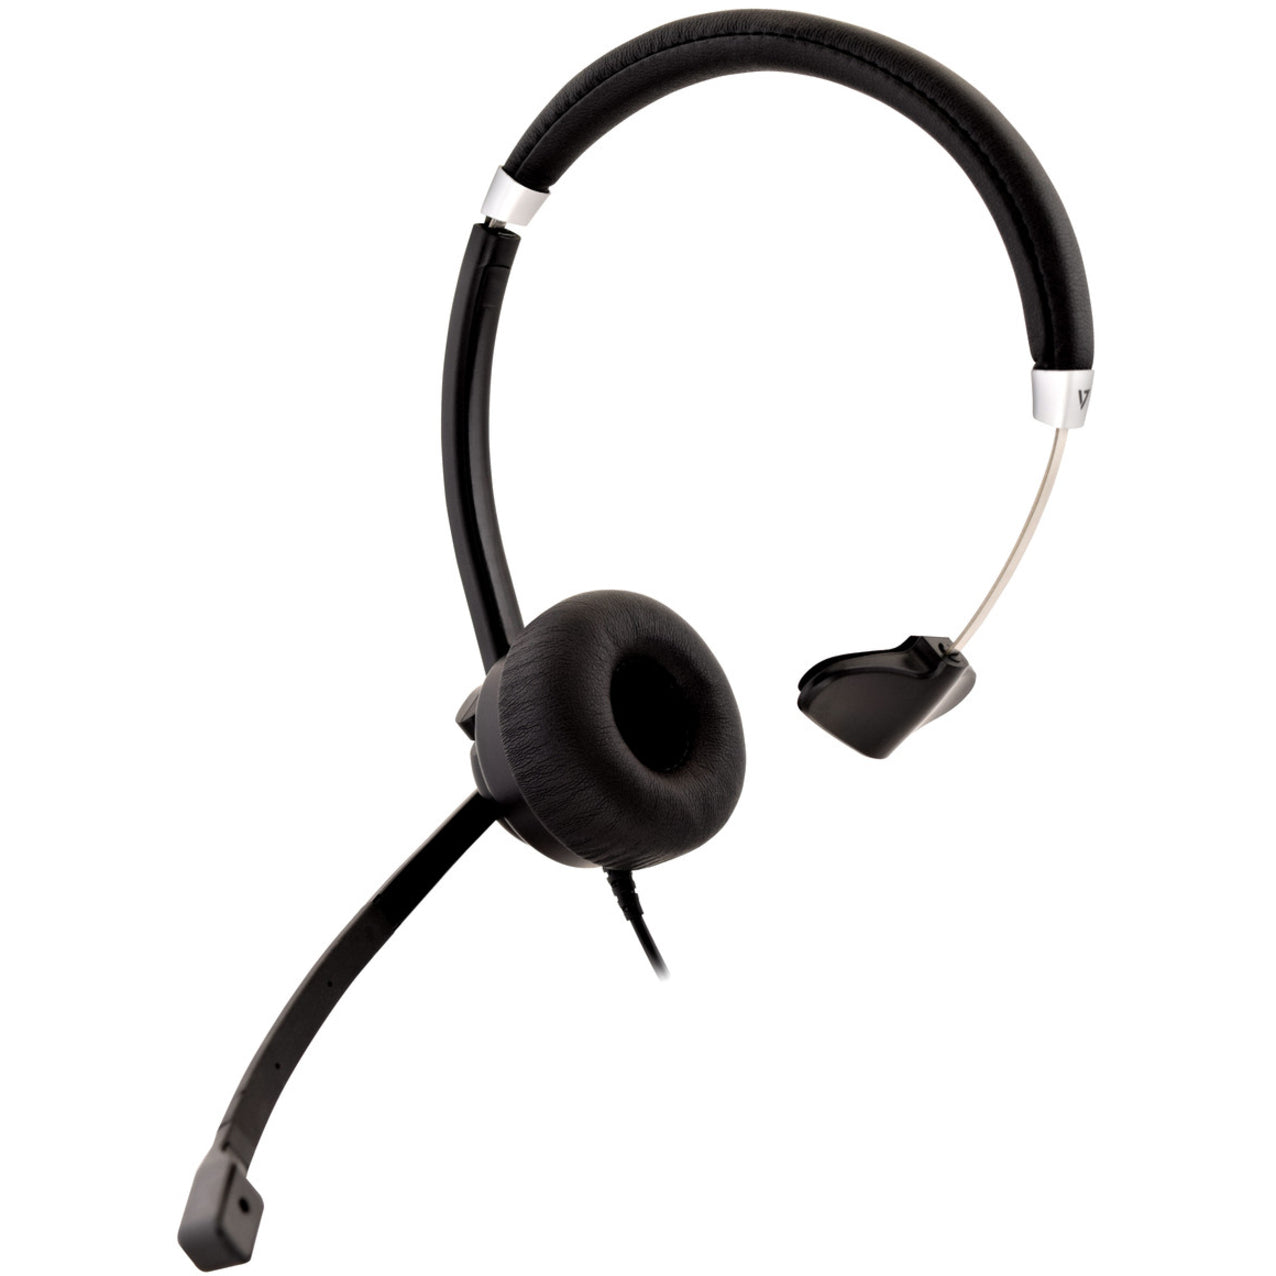 V7 Deluxe USB Mono Headset with Boom Mic